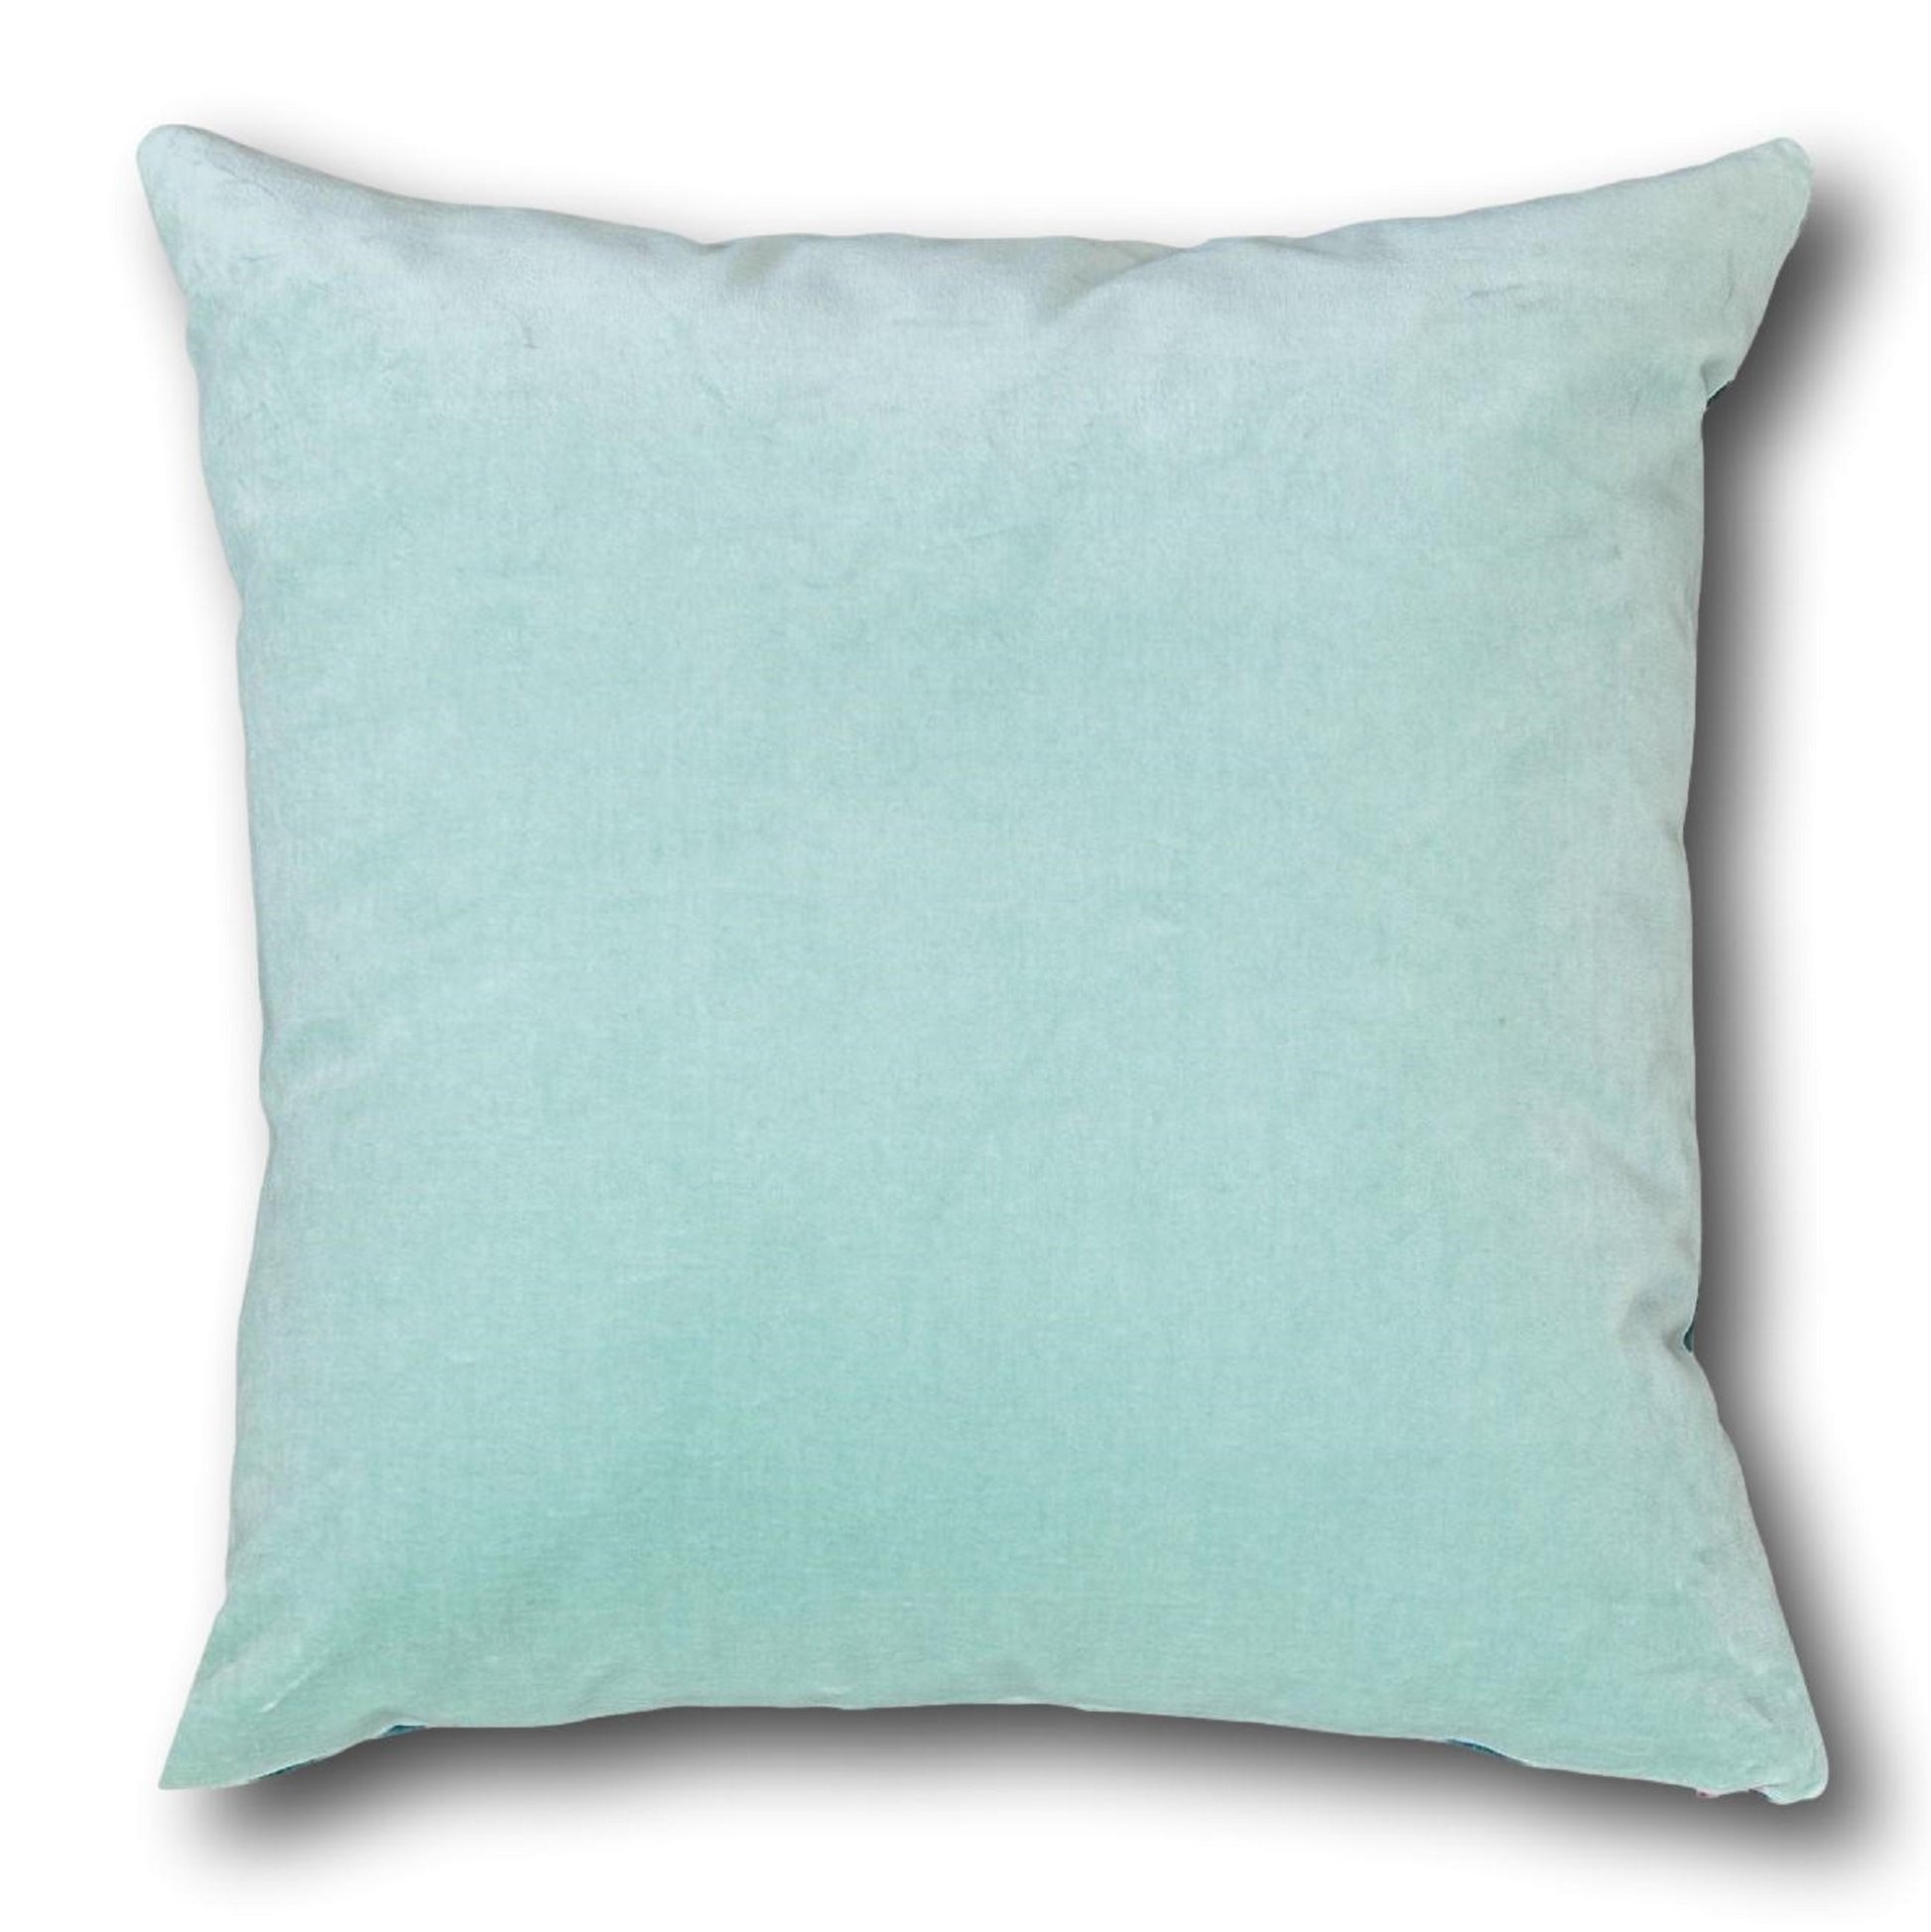 duck egg blue and grey cushions